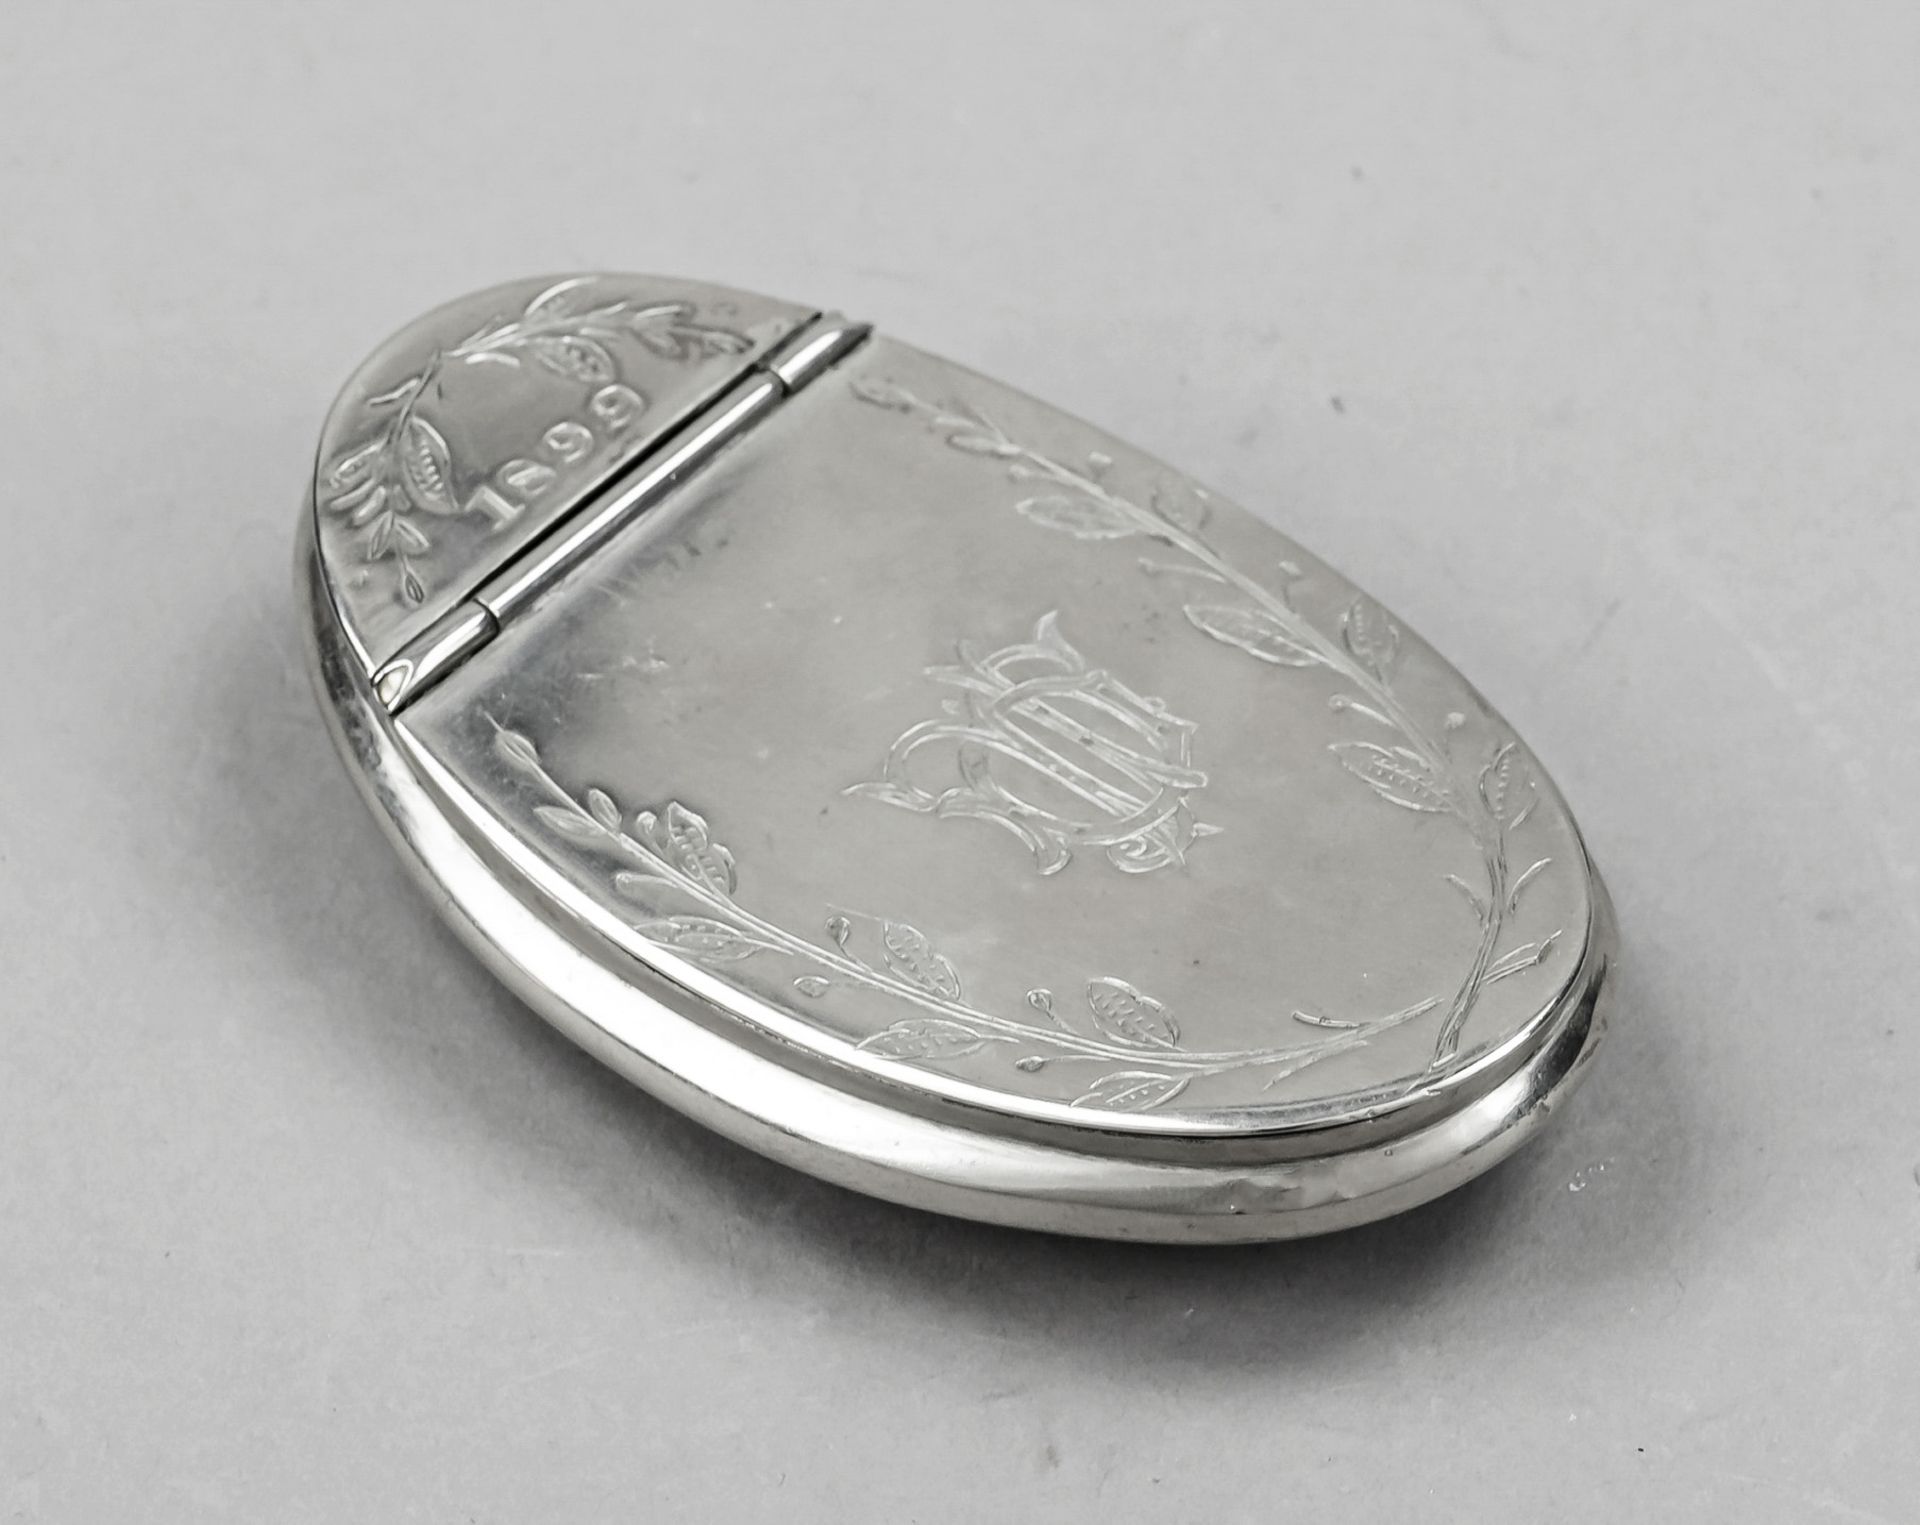 Oval case, late 19th century, plated, curved shape, arched sides, flat hinged lid, wall with